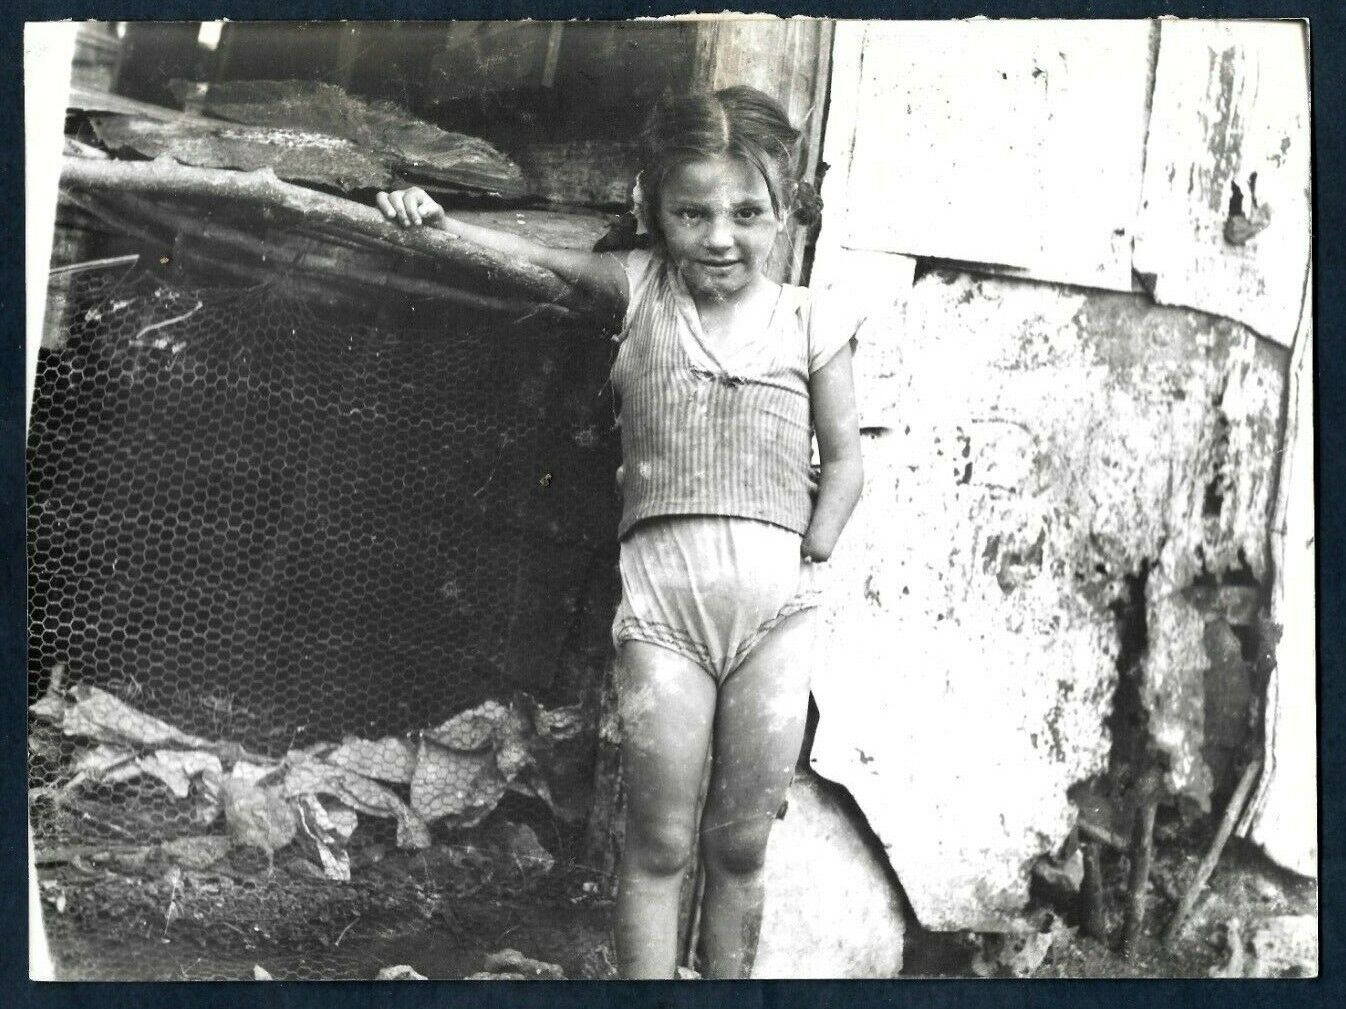 HANDICAPPED BAREFOOT CUBAN YOUNG GIRL SOCIAL EXCLUSION CUBA 1950s Photo Y 174